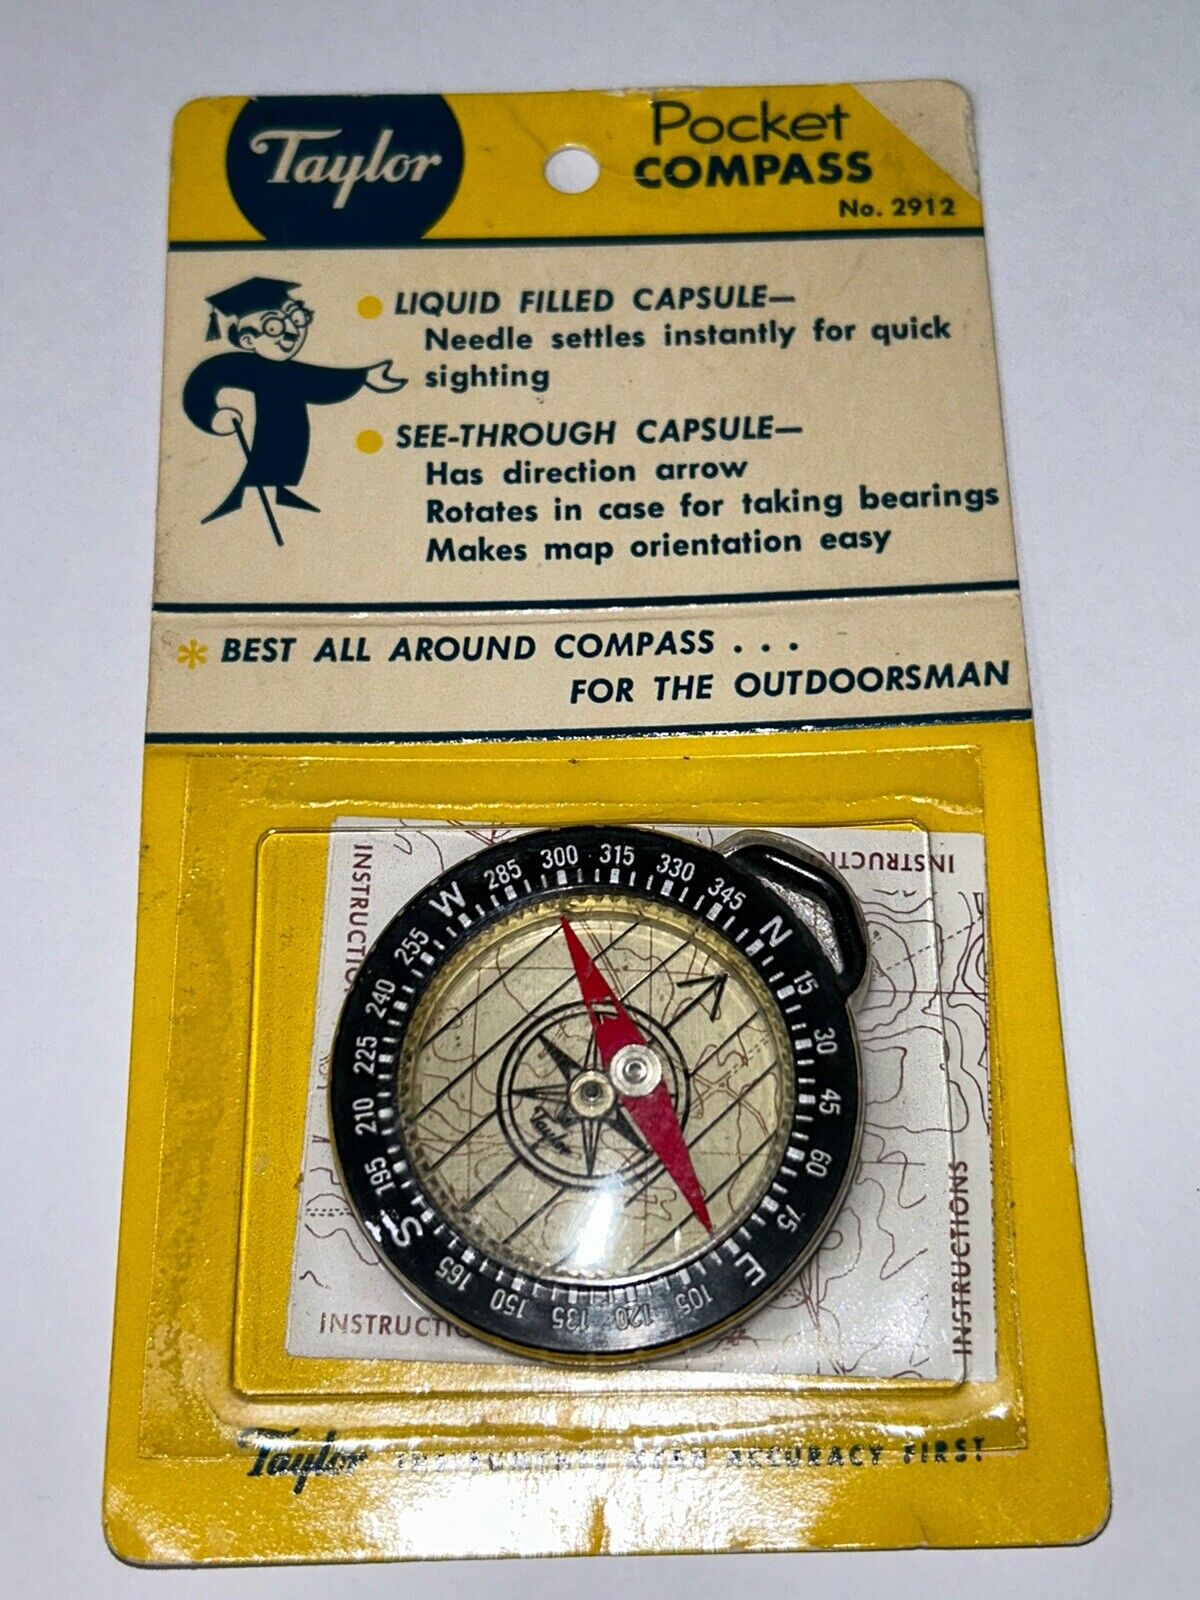 Vintage Taylor Pocket Compass #2912 In Package, COMPASS NEEDLE LOOSE INSIDE